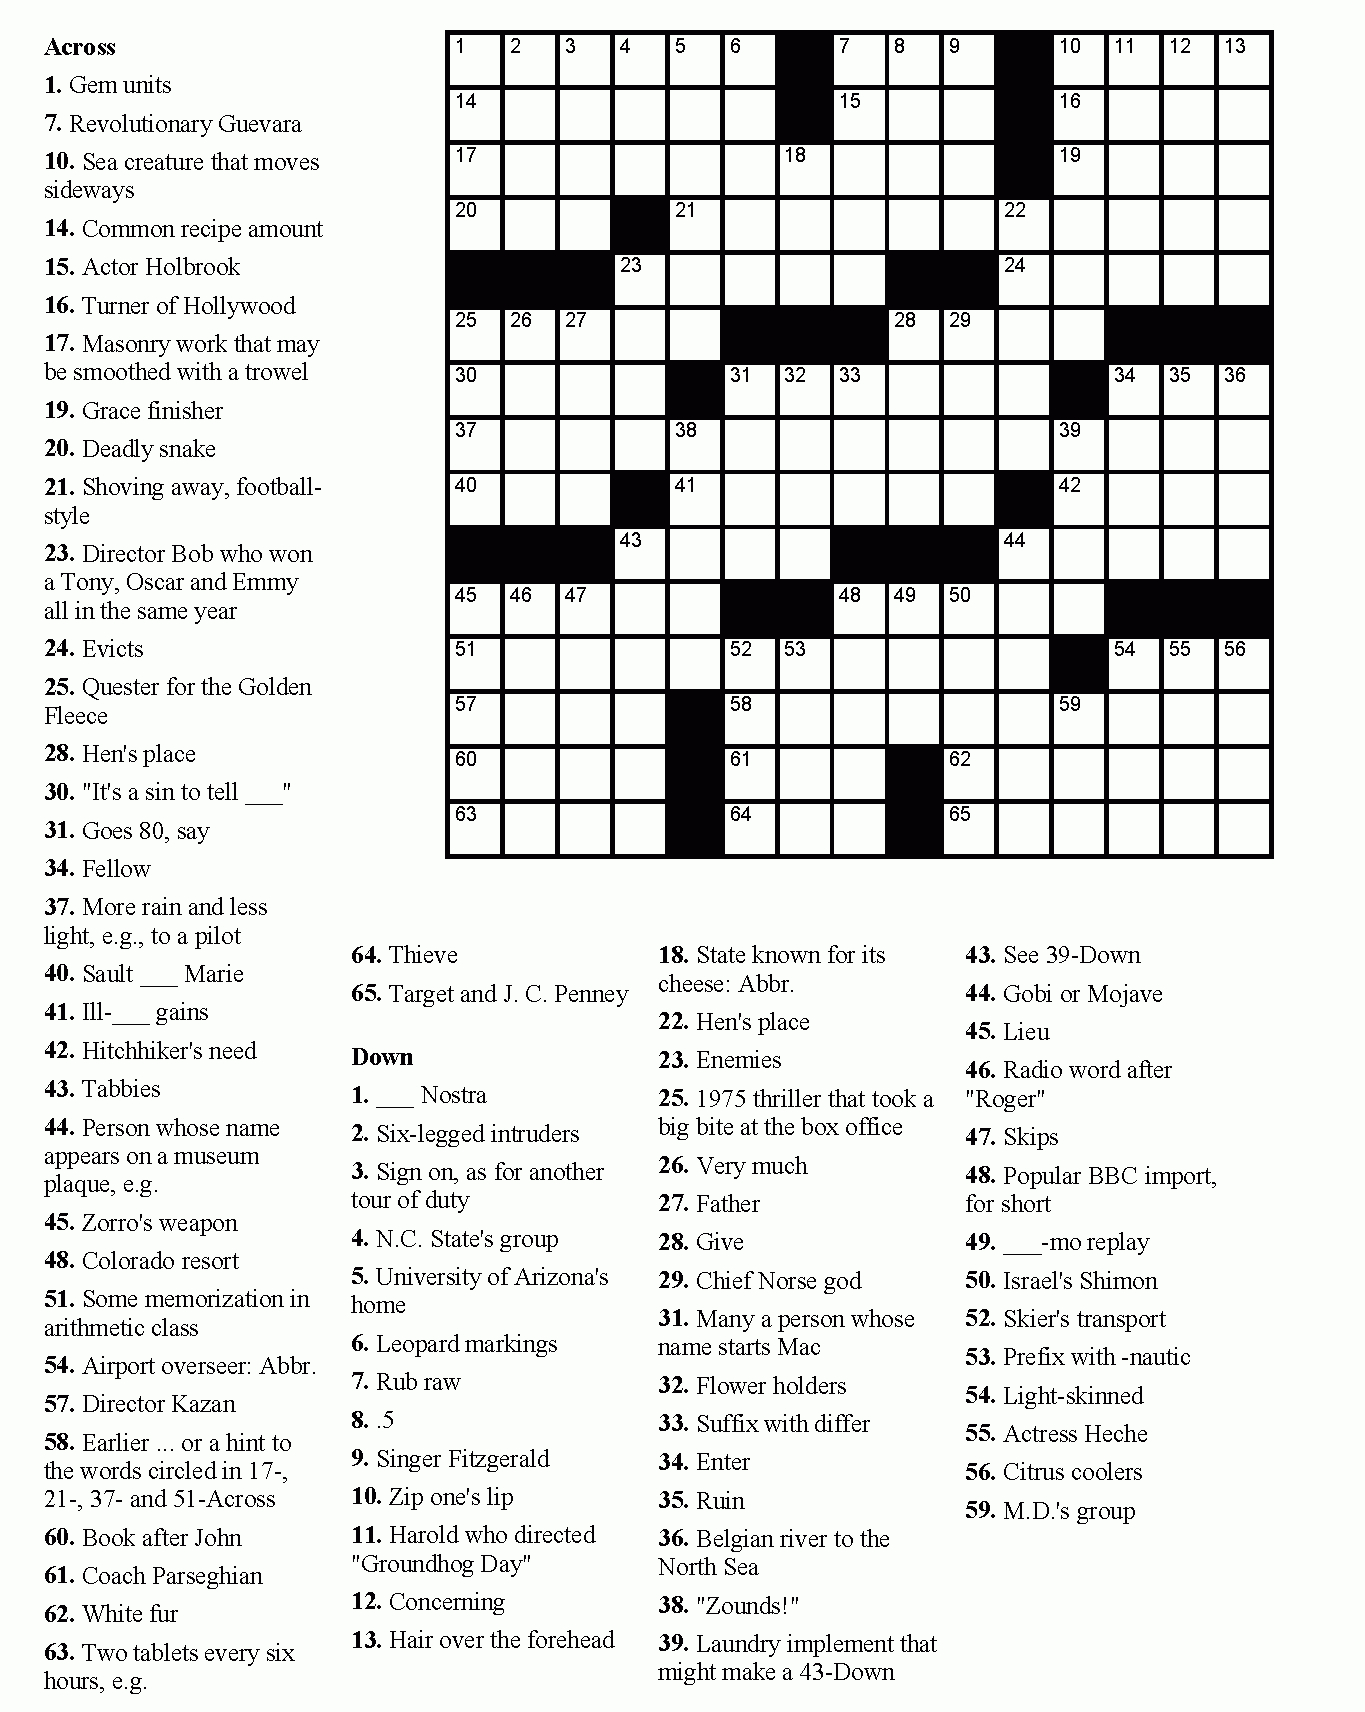 Free Printable Crossword Puzzles Easy For Adults | My Board - Free Easy Printable Crossword Puzzles For Adults